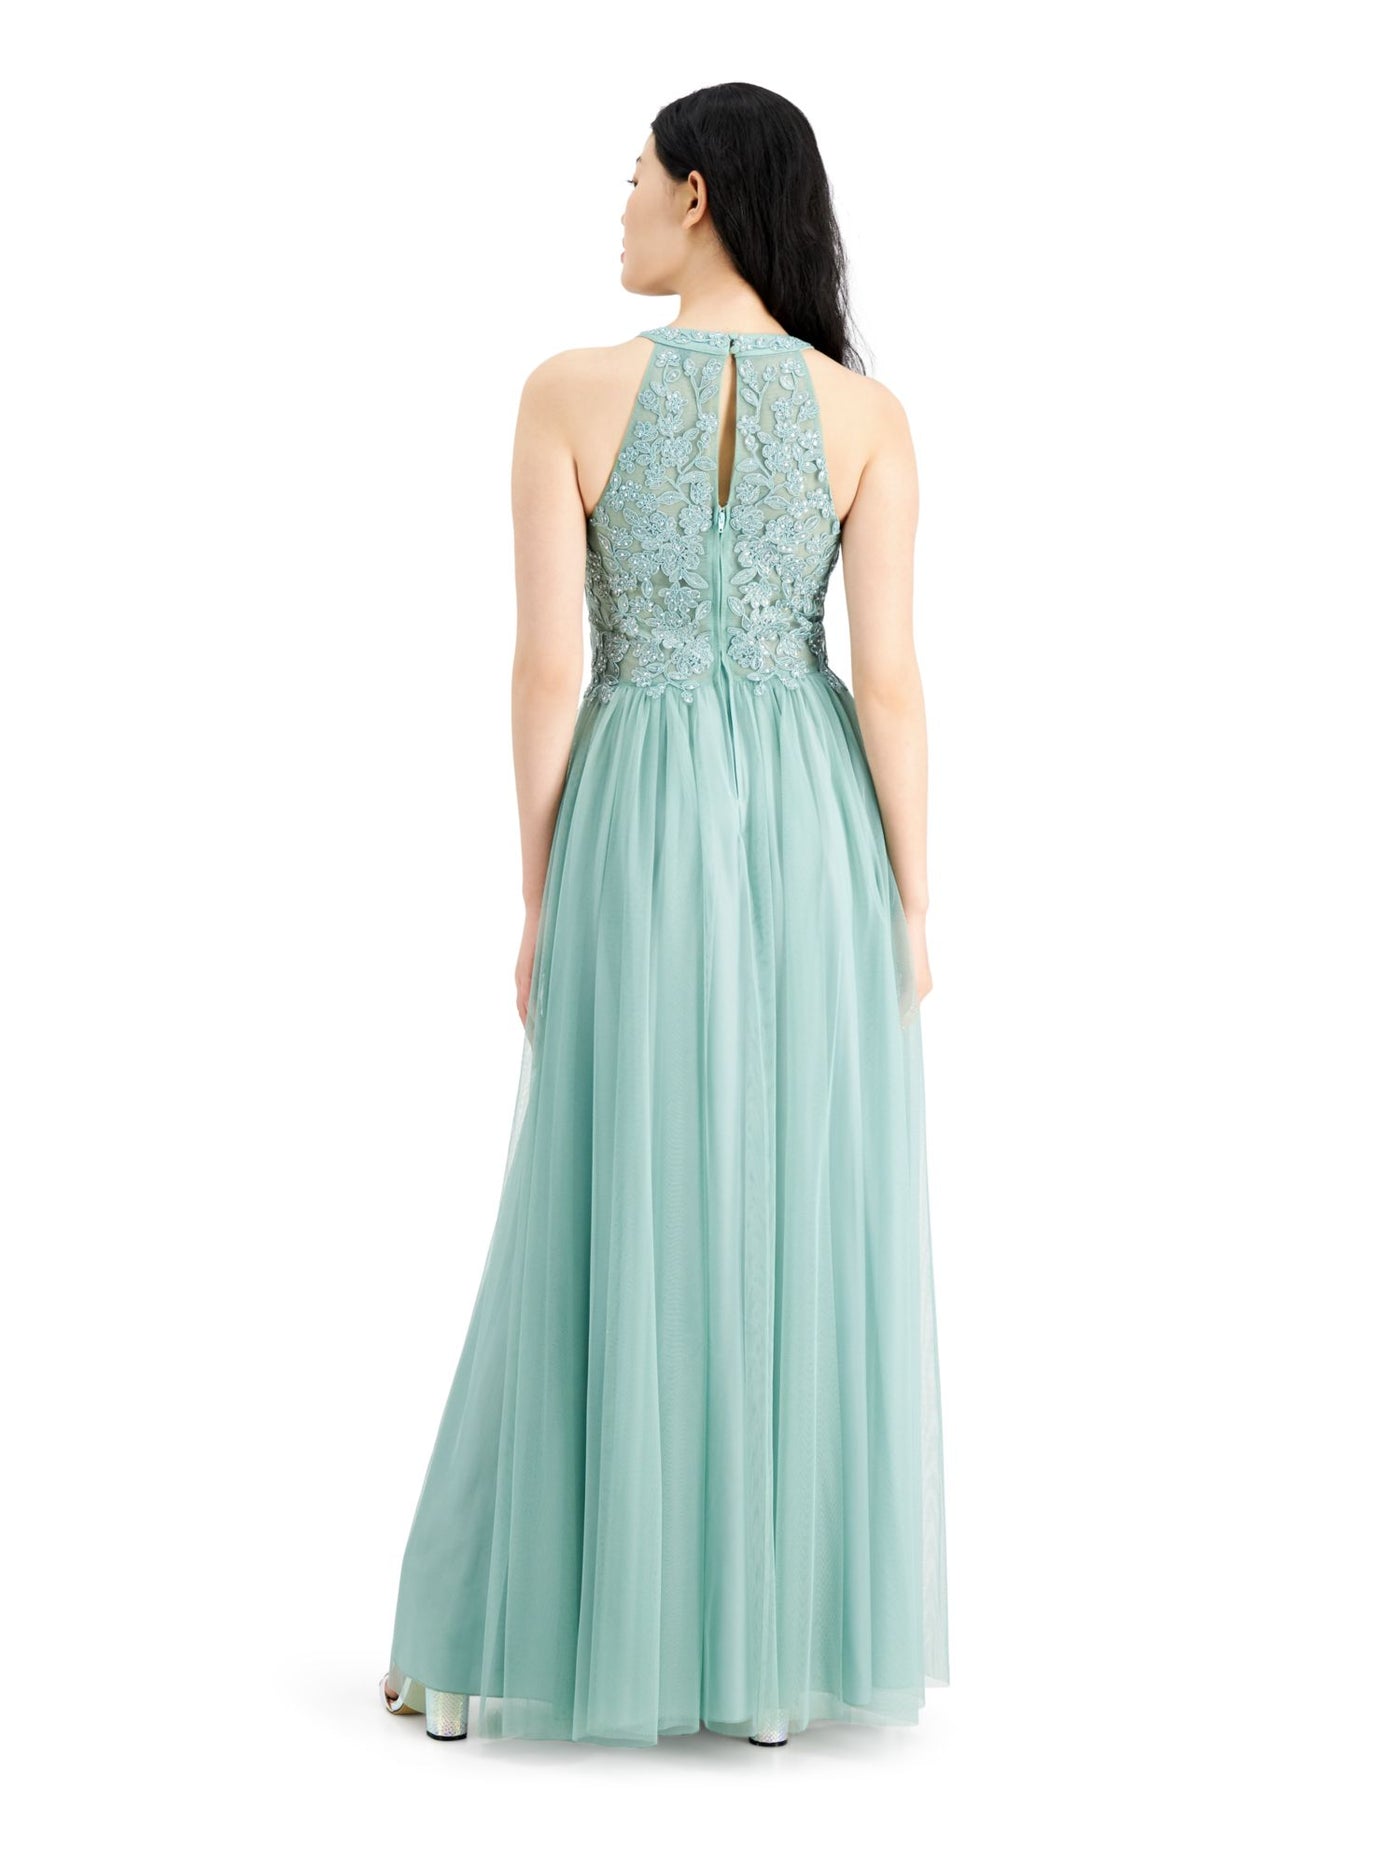 SPEECHLESS Womens Turquoise Embroidered Embellished Lace Gown Sleeveless Halter Full-Length Prom Dress Juniors 0